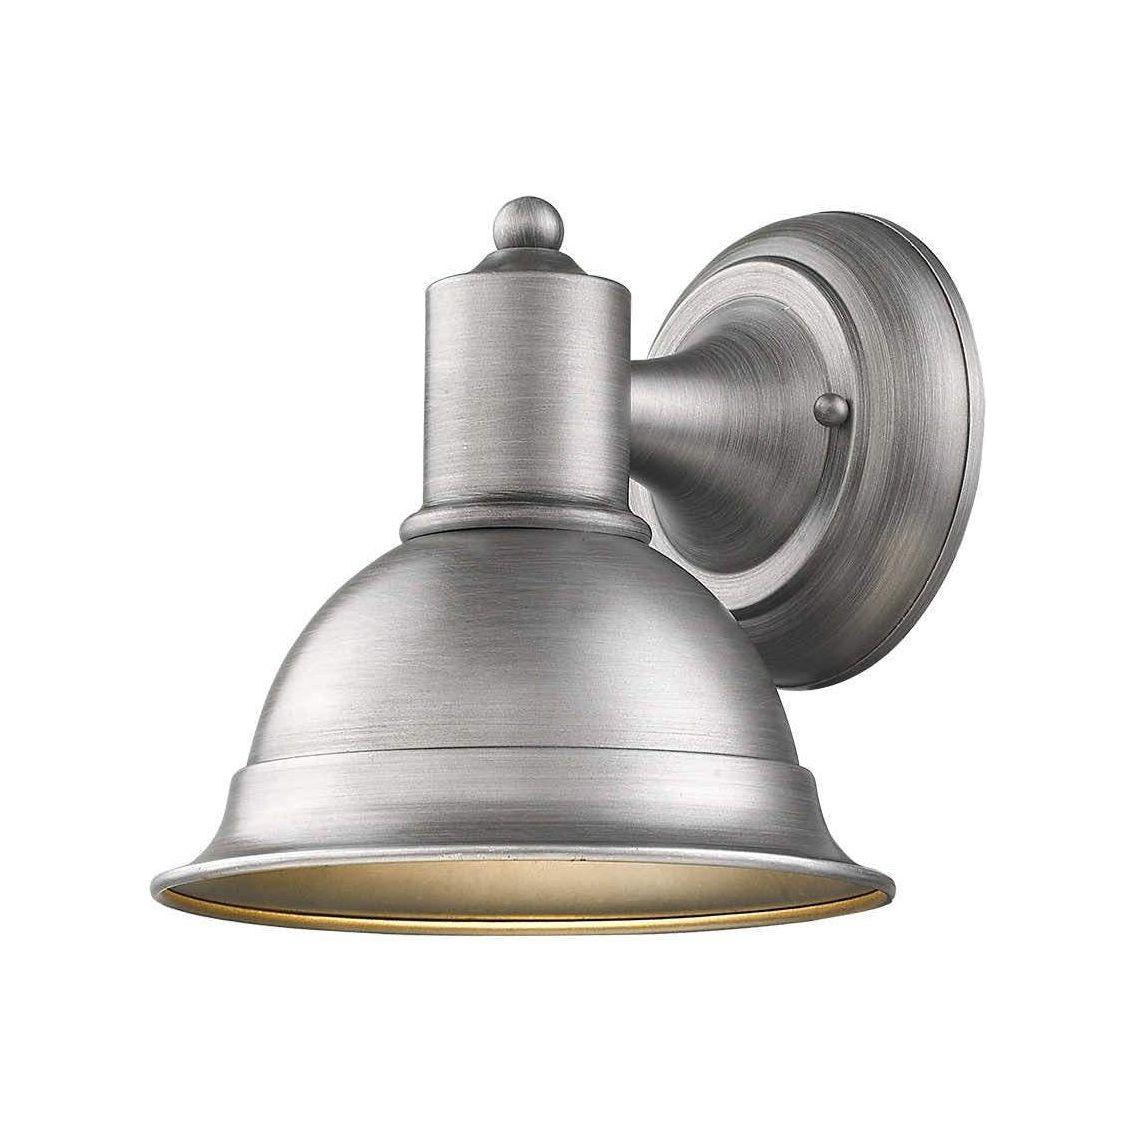 Acclaim - Colton Outdoor Wall Light - Lights Canada